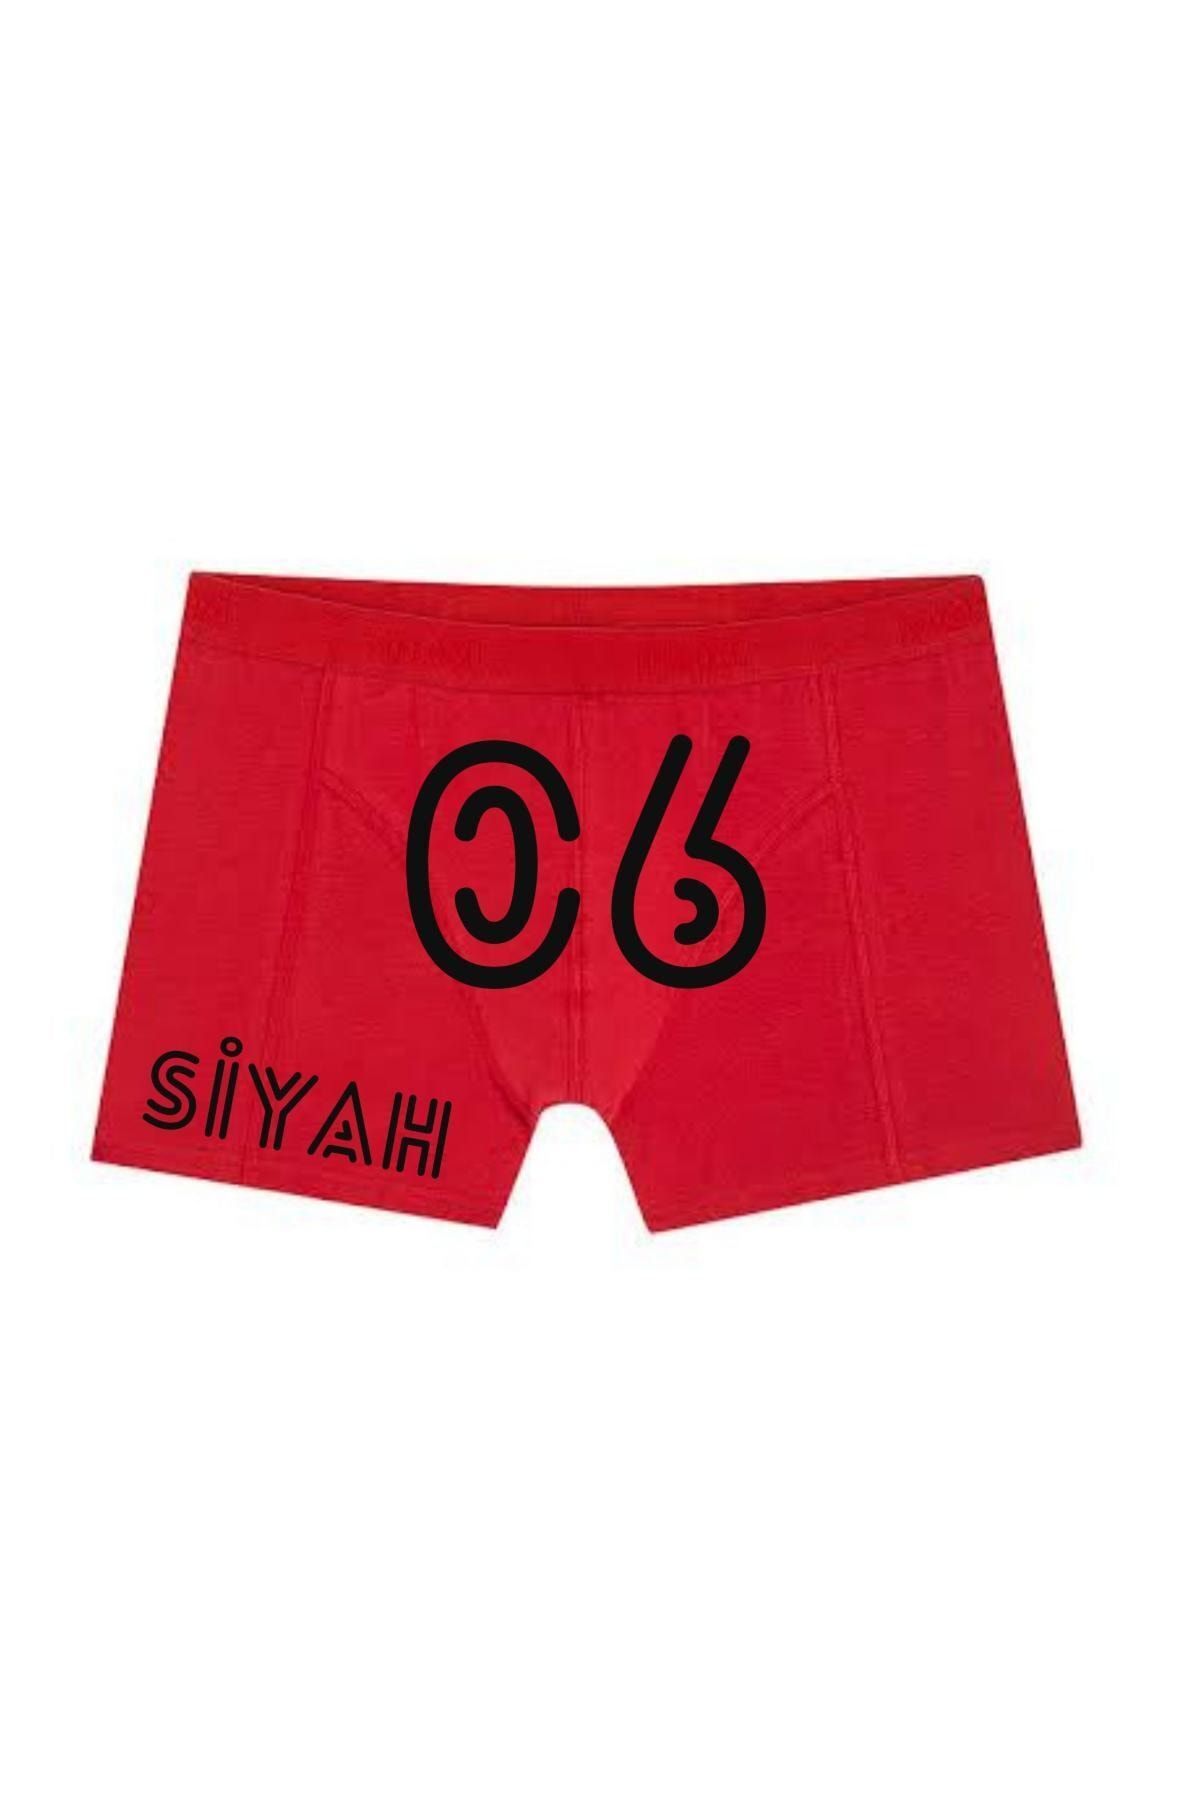 Printed Underwear with Photo and Text